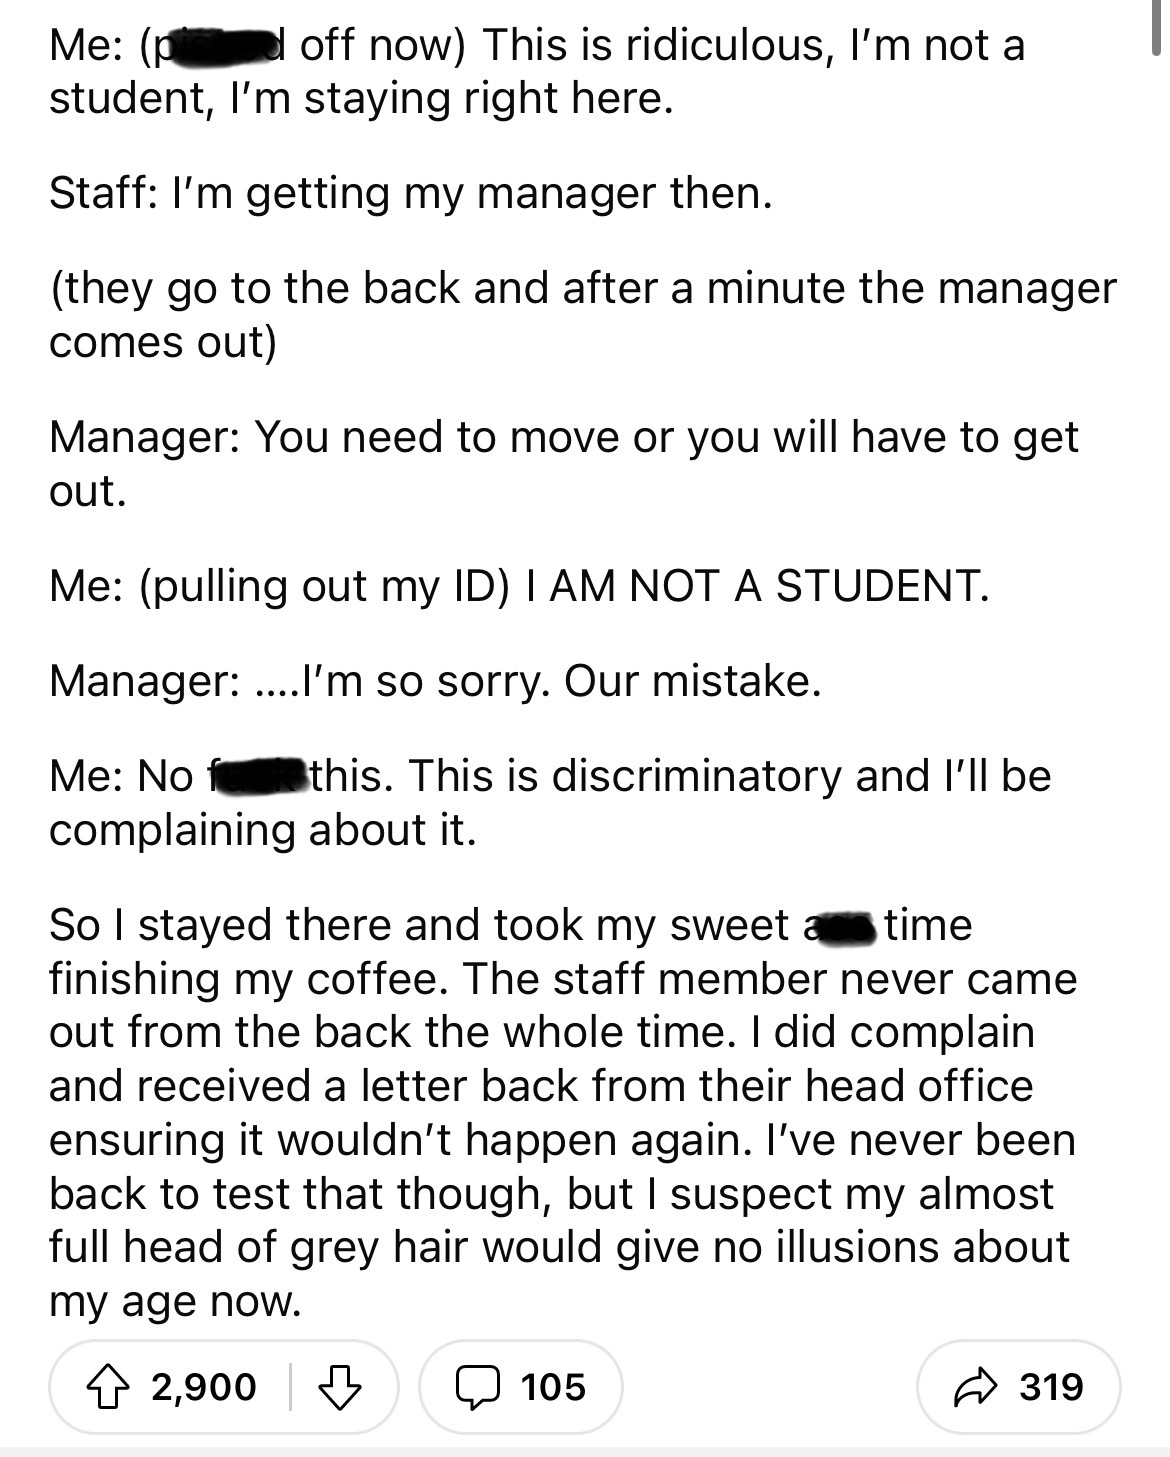 document - Me off now This is ridiculous, I'm not a student, I'm staying right here. Staff I'm getting my manager then. they go to the back and after a minute the manager comes out Manager You need to move or you will have to get out. Me pulling out my Id